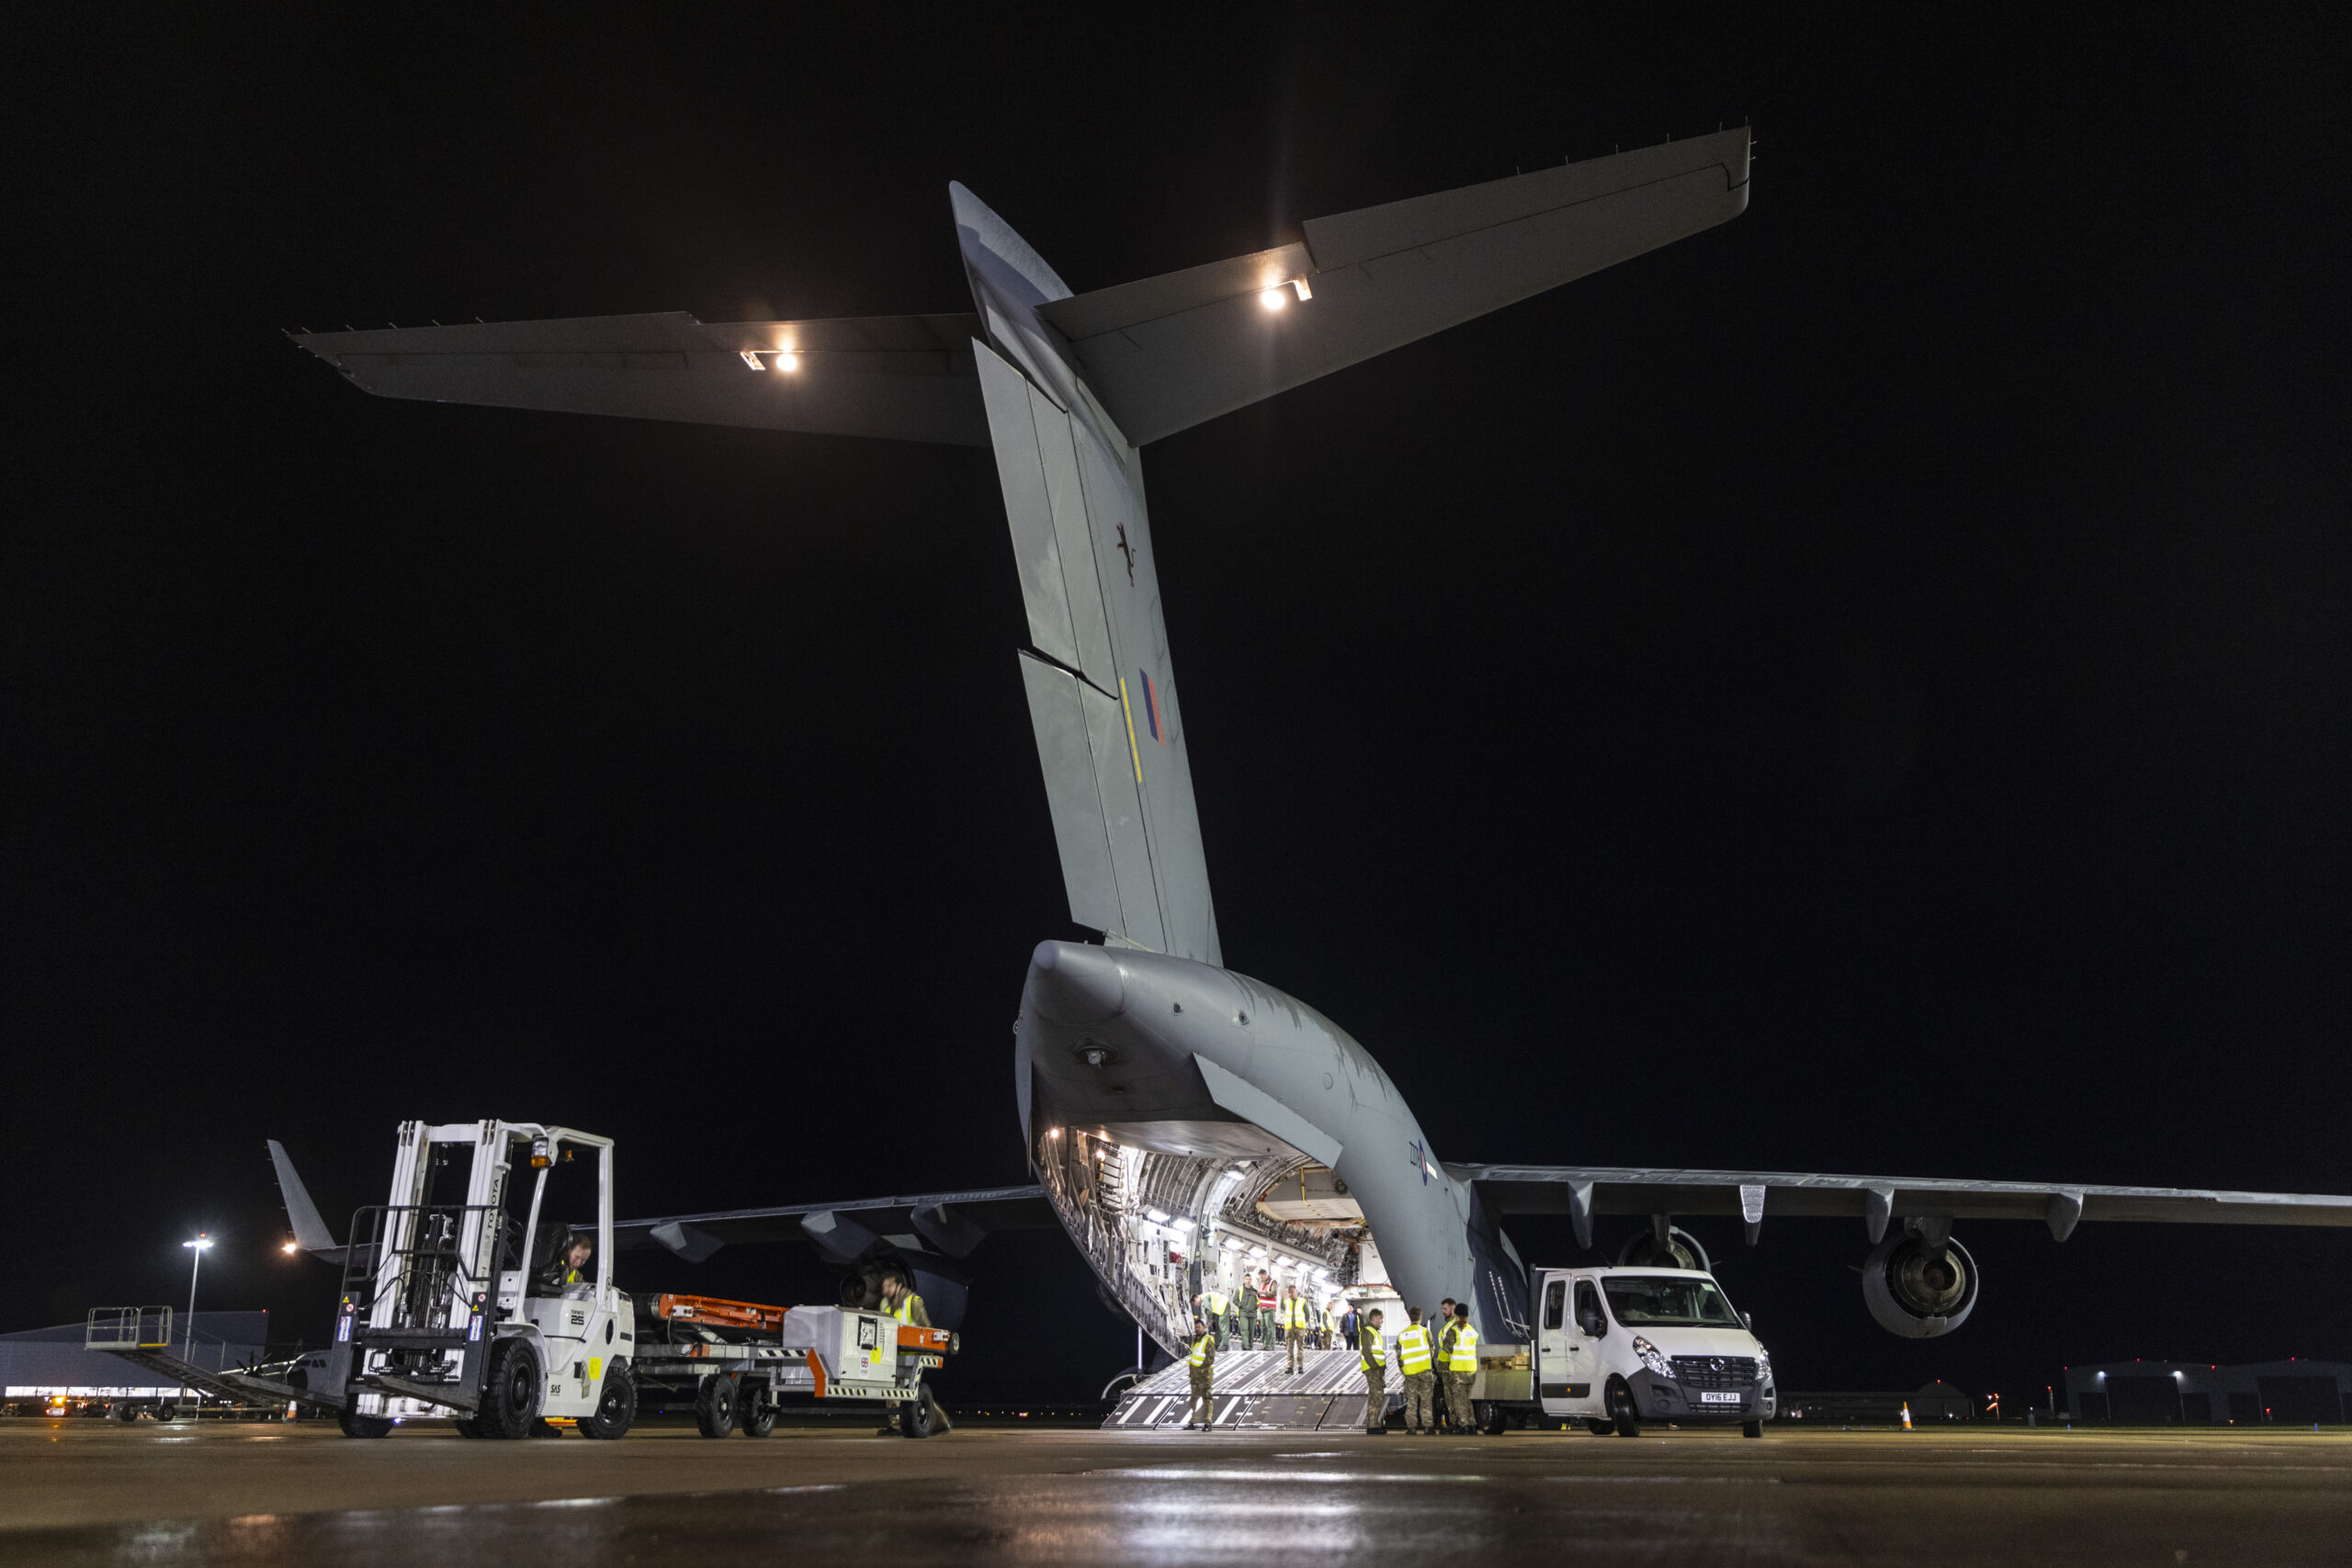 A second UK flight carrying equipment that will support humanitarian agencies to deliver lifesaving supplies to Gaza arrived in Egypt today. This will be followed by a number of flights to deliver 30 tonnes of vital equipment such as forklift trucks, belt conveyors and lighting towers, which have been specifically requested by UK partners in the region, including the Egyptian Red Crescent. RAF delivers another large load of essential equipment to Middle East, consignment includes · Generators · Forklift trucks · Pallet trucks, including 2 for rough terrain Fuel store · Conveyor belt loader · Vehicle service kits The equipment will be set up close to the Rafah border crossing  increasing the capacity of agencies to manage and deliver significant quantities of aid to those in Gaza. Rafah is currently the only entry point for aid into Gaza. This is the second Royal Air Force humanitarian flight from Brize Norton and follows the delivery of 21 tons of essential supplies, including wound care packs and water filters, which arrived in Egypt last week and was handed over to partner agencies working on the ground in Gaza.